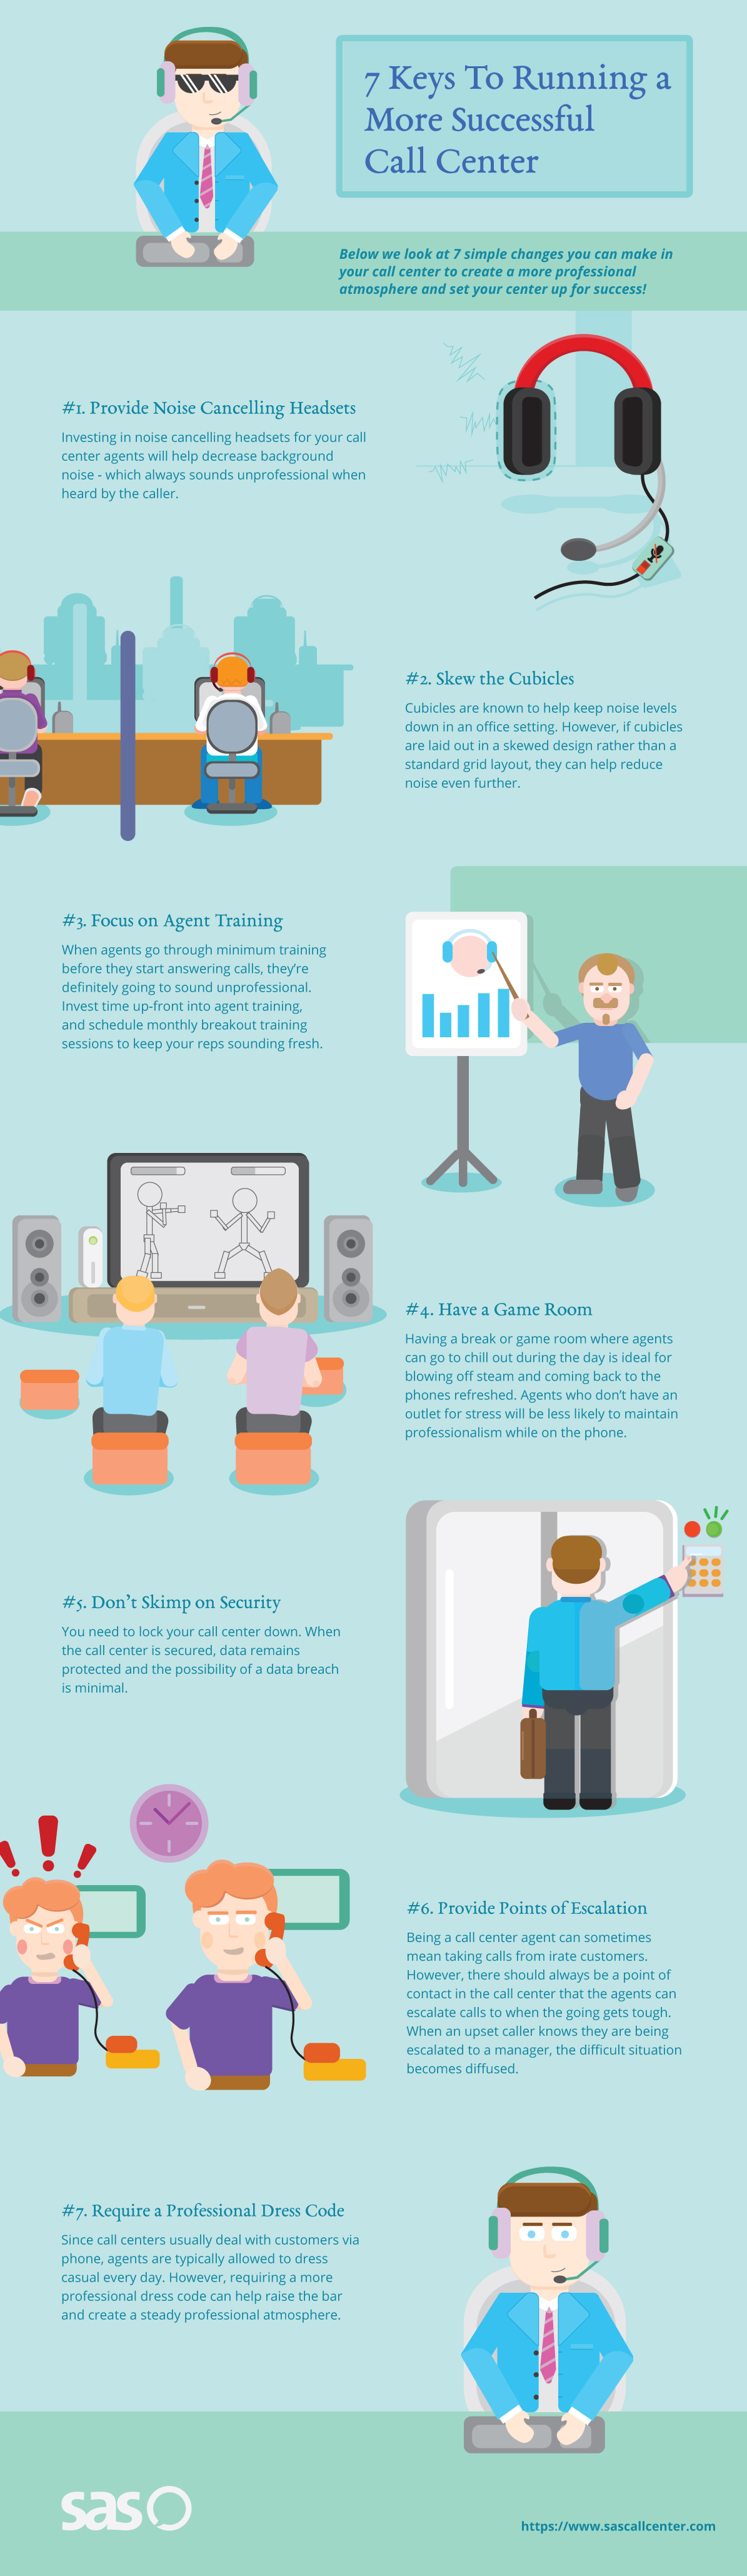 7 Keys to Running A Successful Call Center Infographic